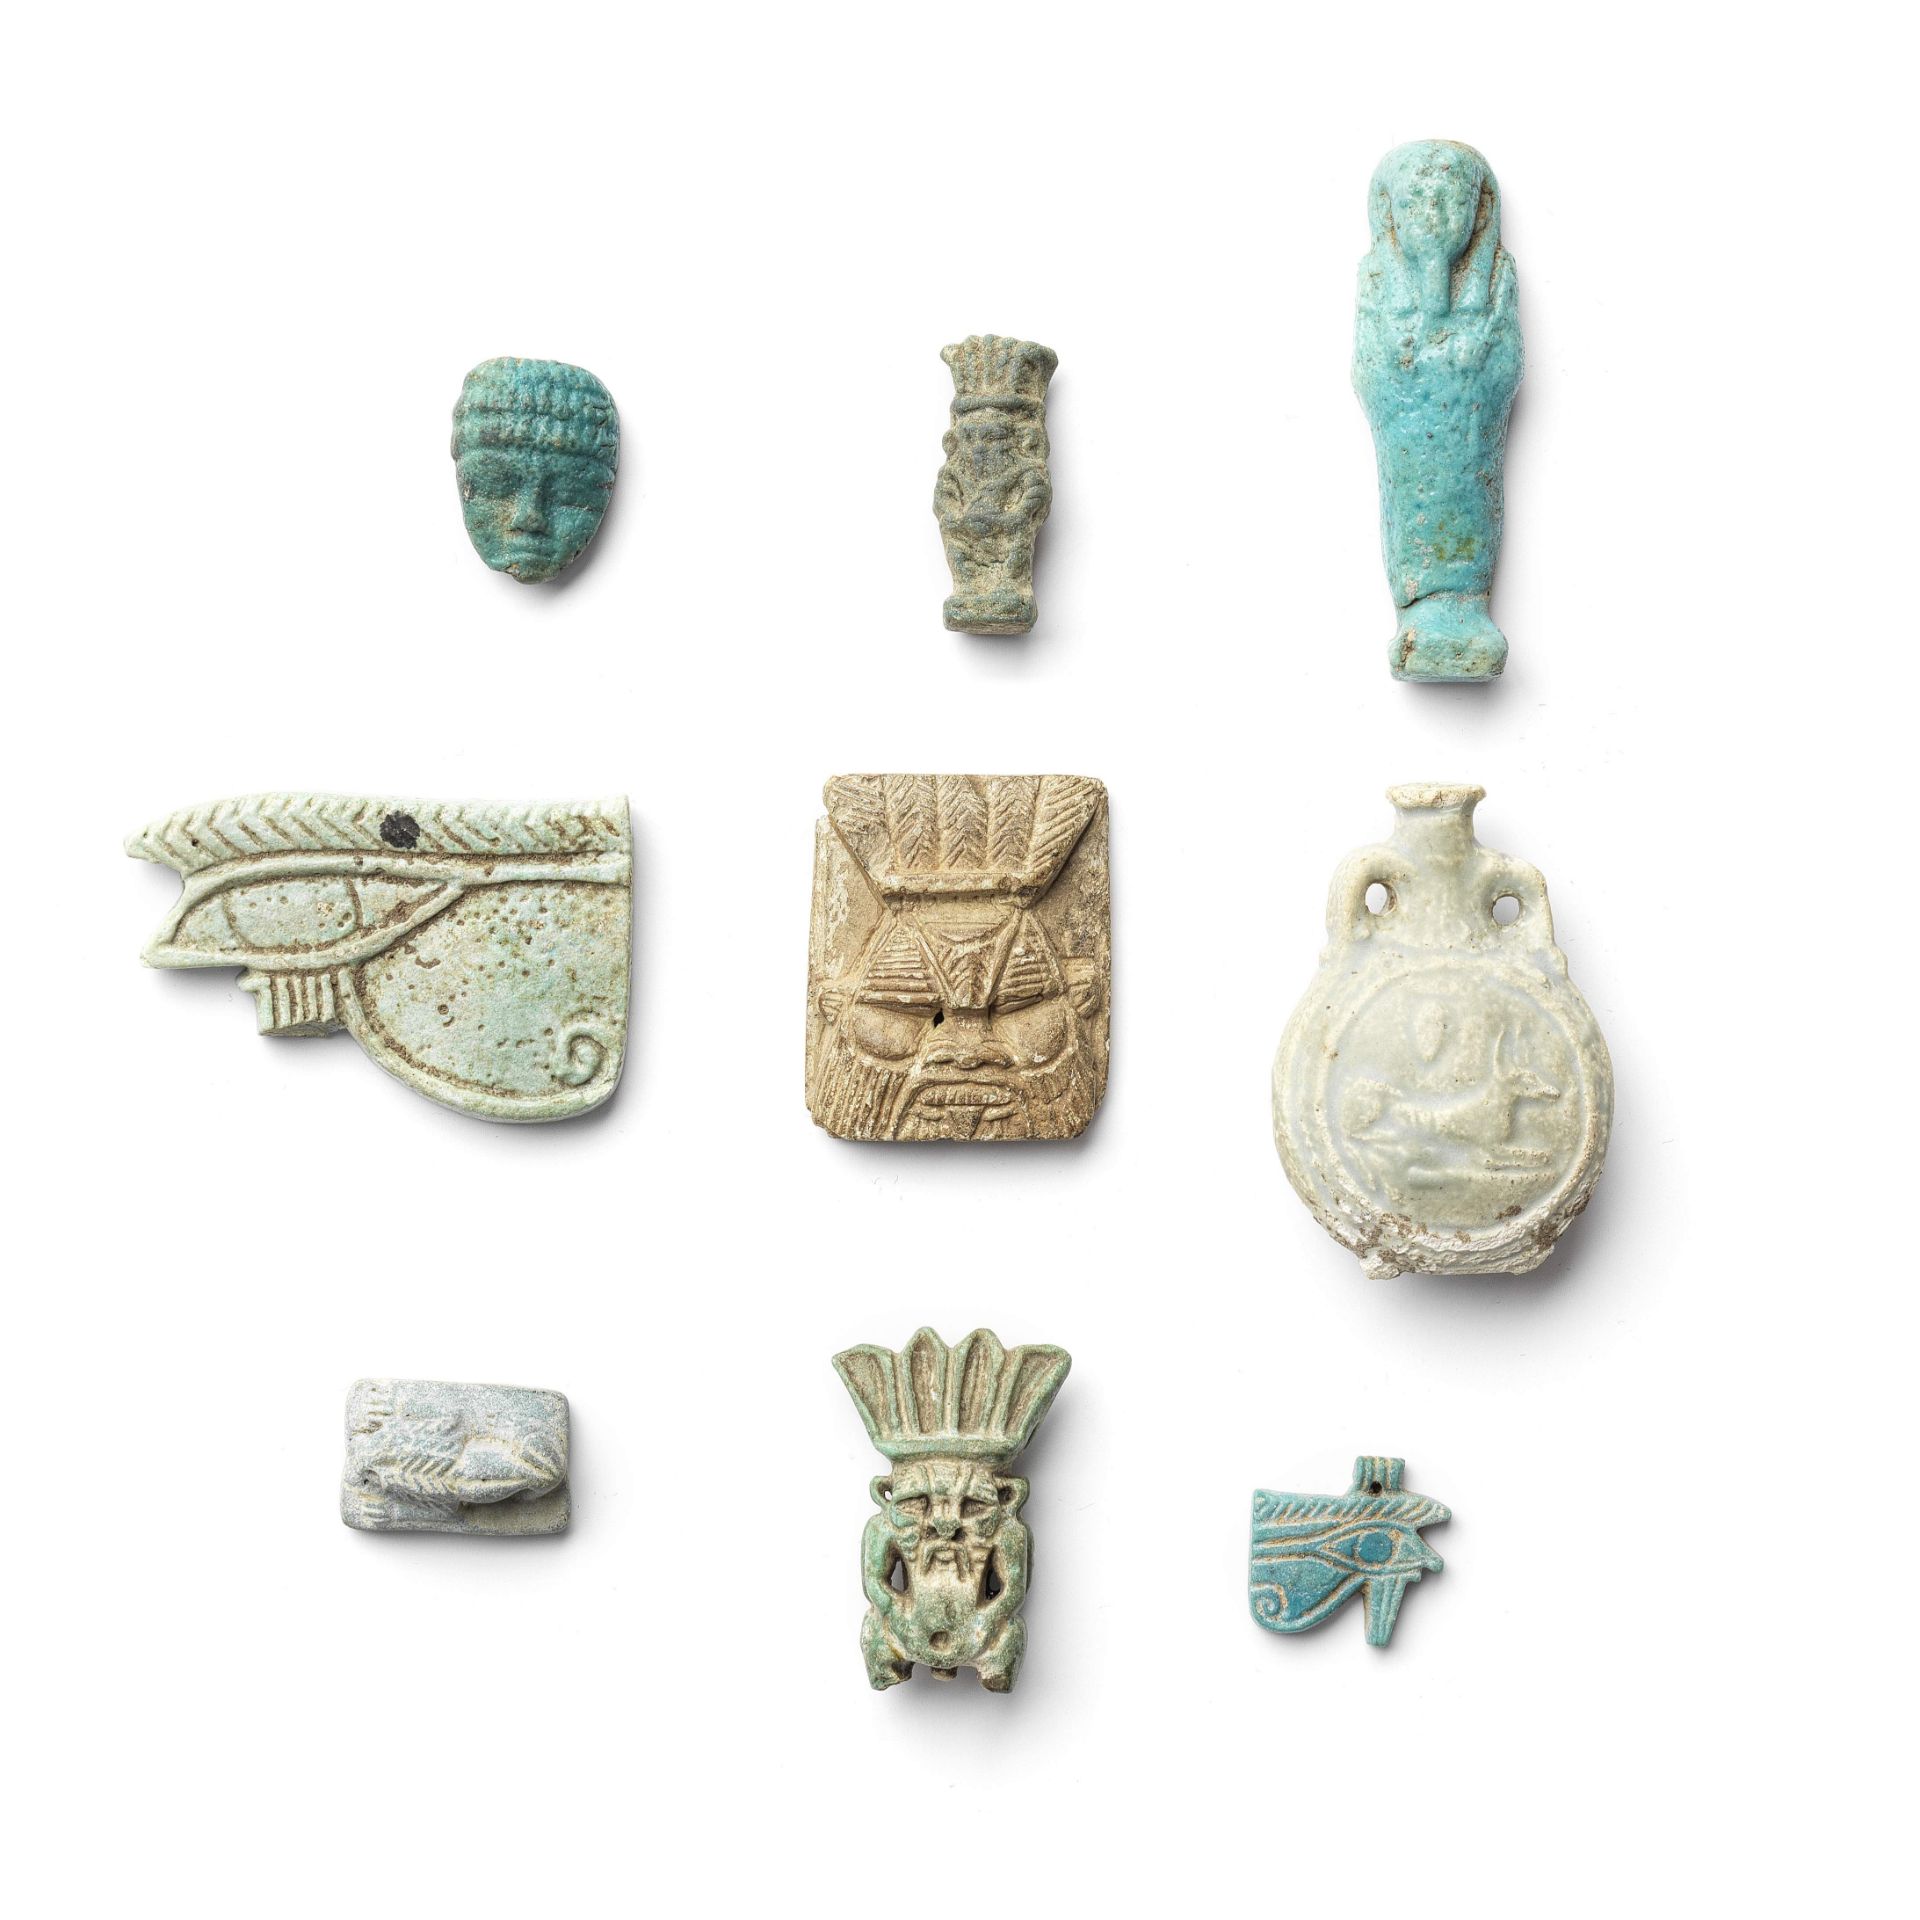 Eight Egyptian faience objects together with an Egyptian glazed steatite Bes plaque, 9